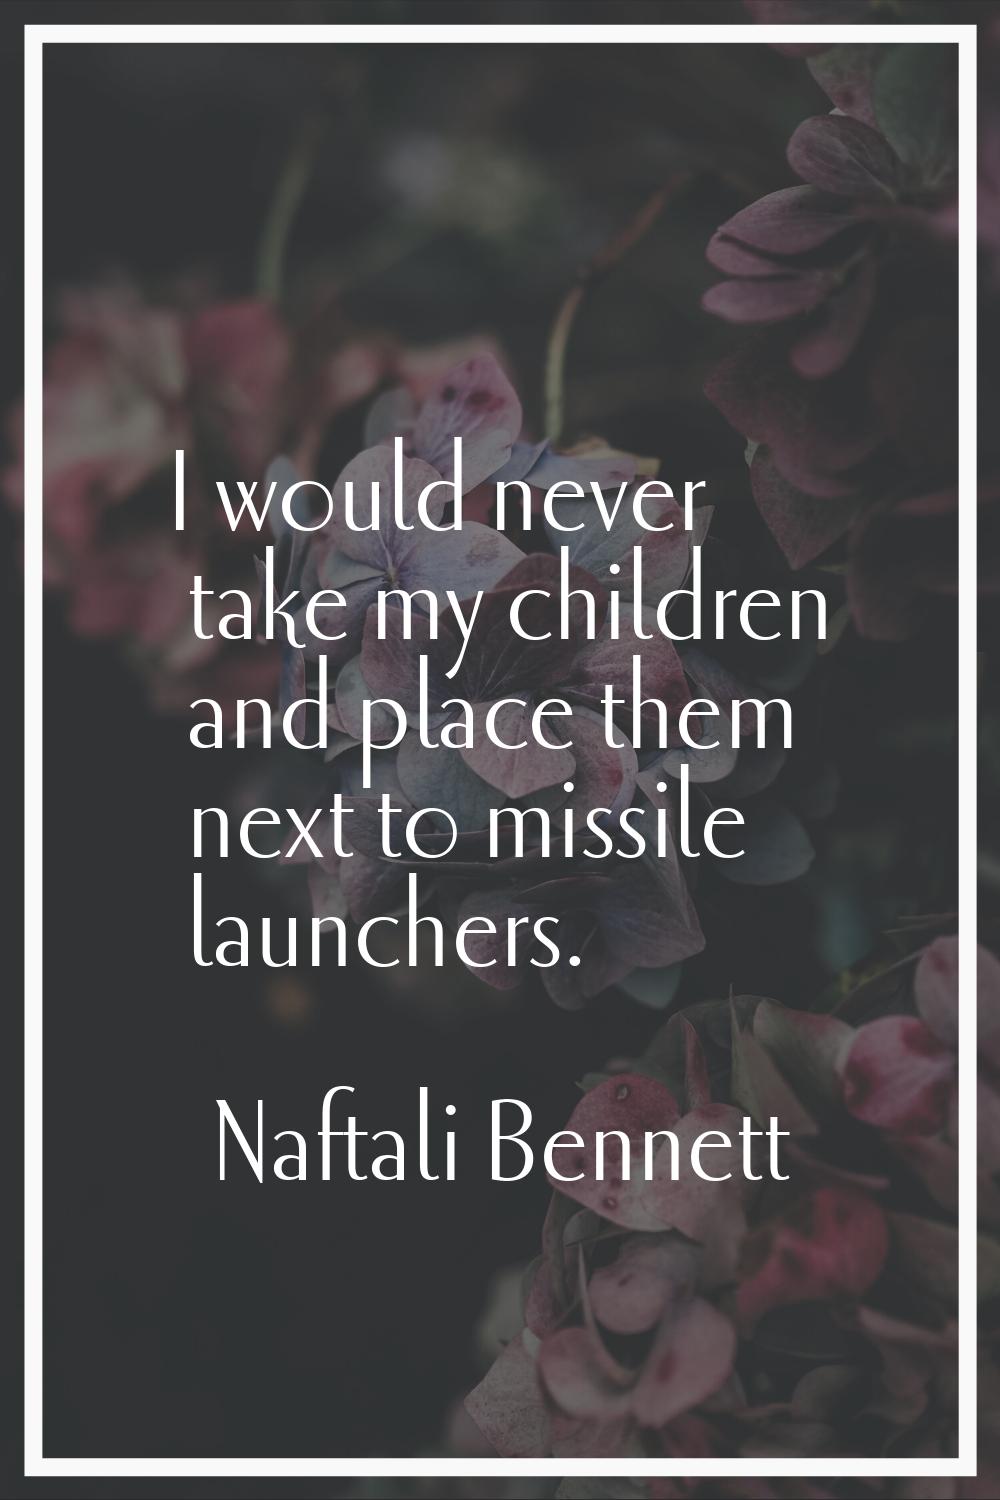 I would never take my children and place them next to missile launchers.